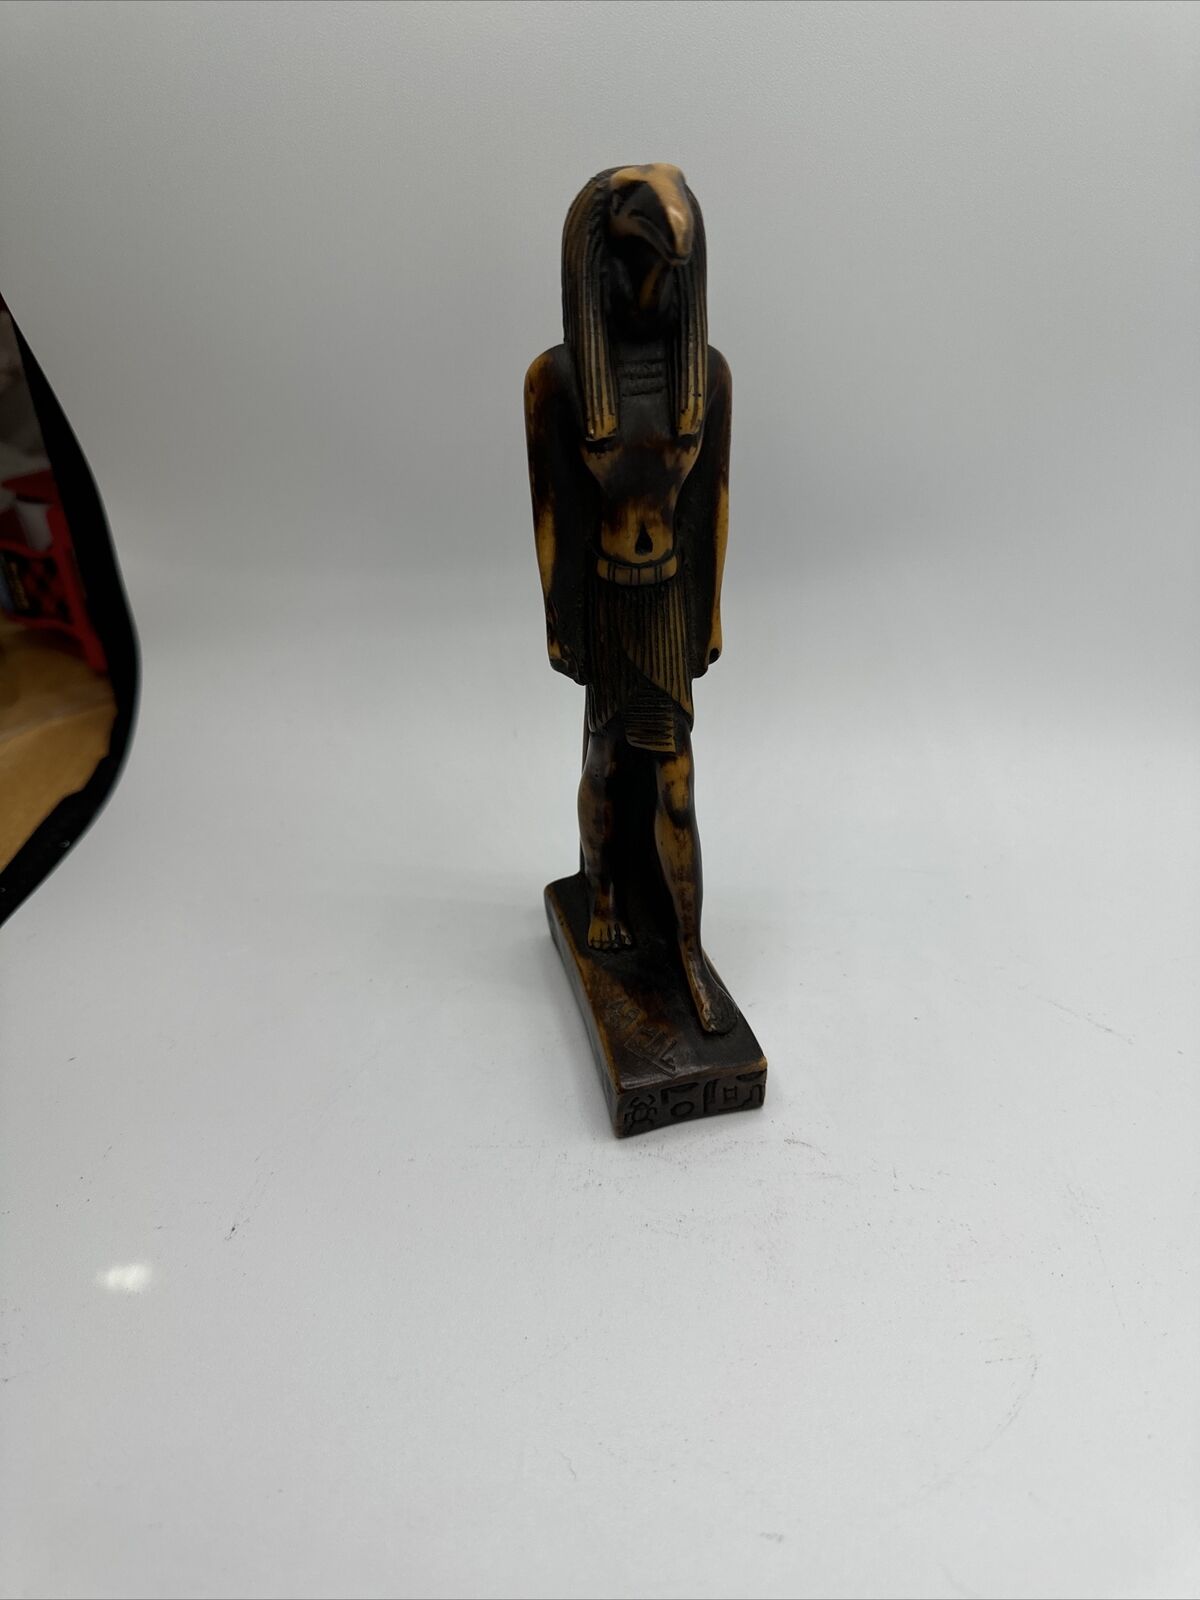 Vintage Egyptian Thoth Statue Handmade Signed MCM Dated 1949 Estate Find Bone?